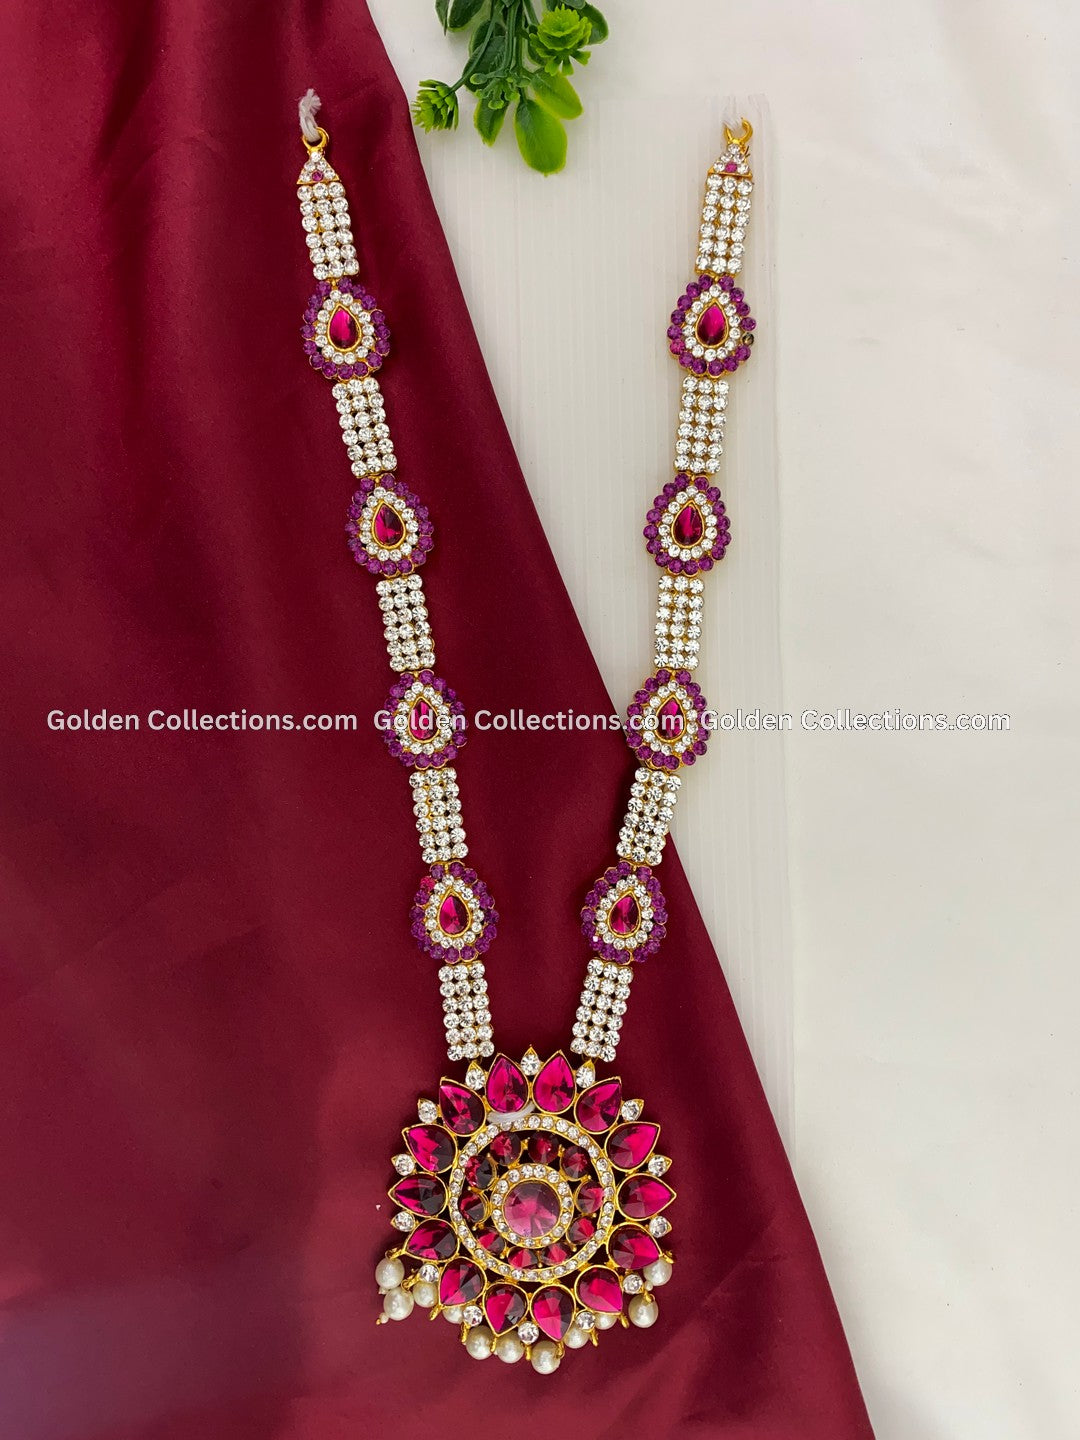 Sacred Temple Jewellery Online - Shop Now - GoldenCollections